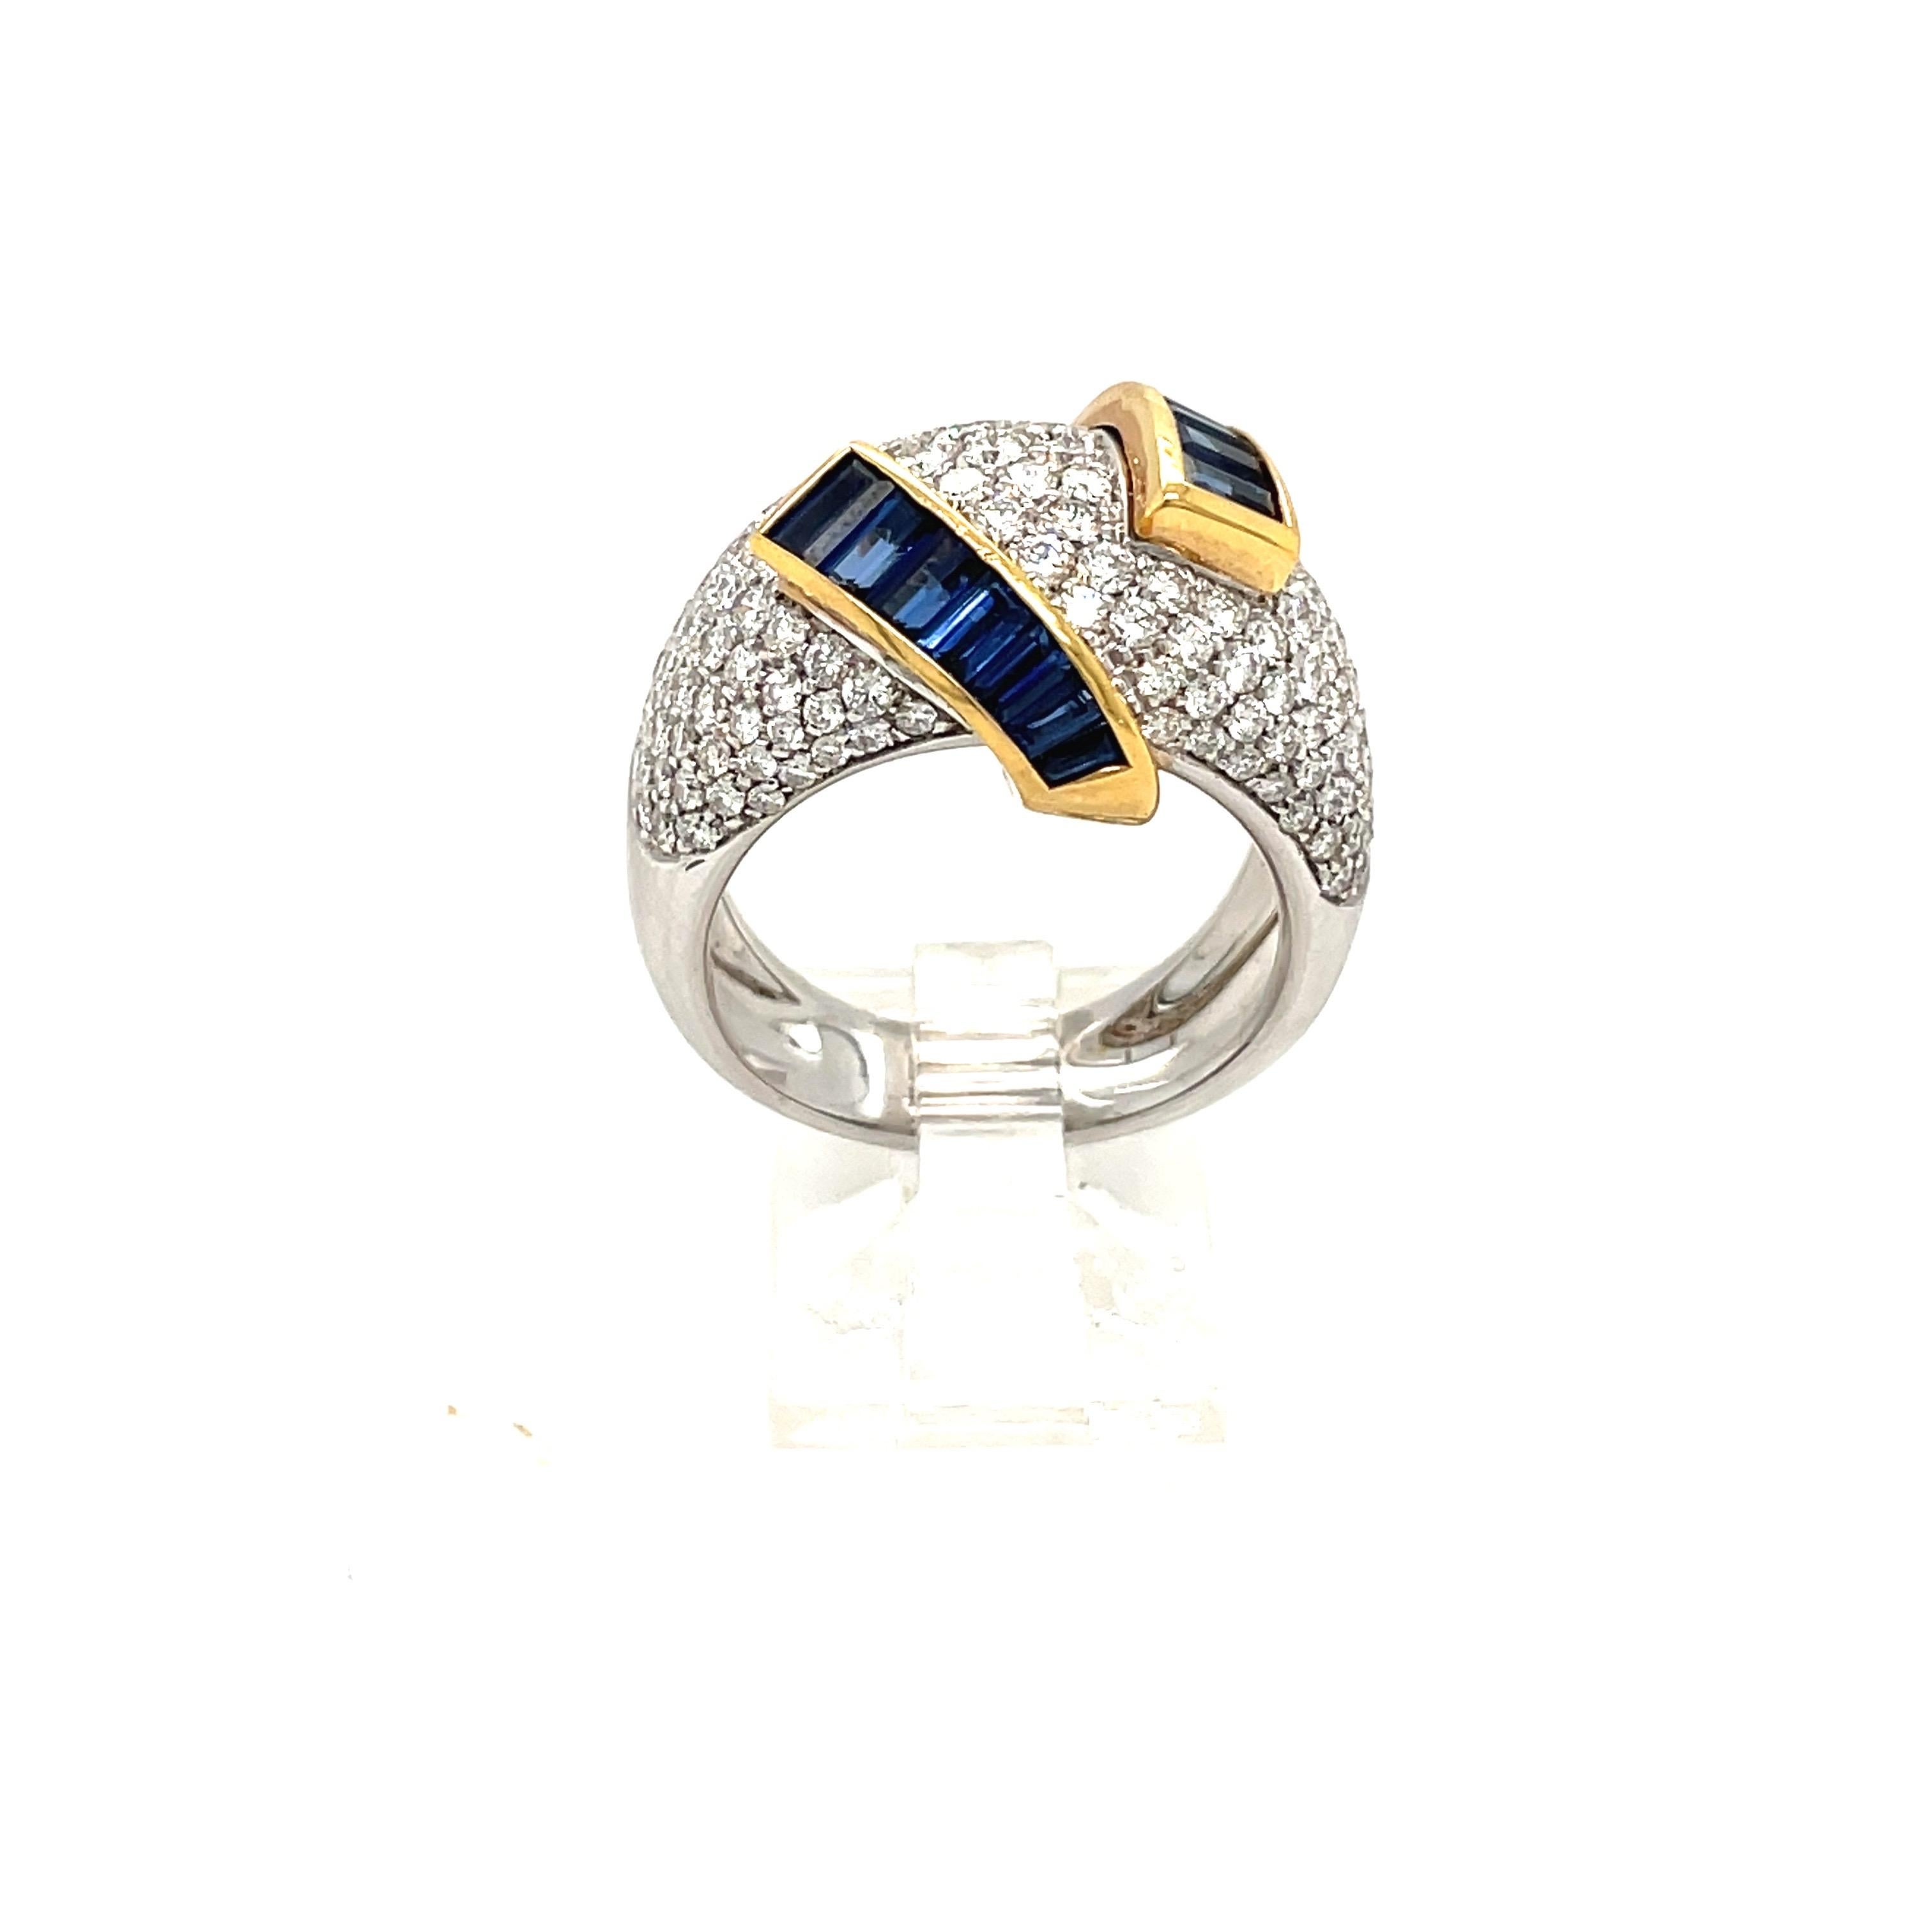 Alfiere & St. John 18KT Gold, Diamond 1.99 Carat and Blue Sapphire 2.15Ct. Ring For Sale 2